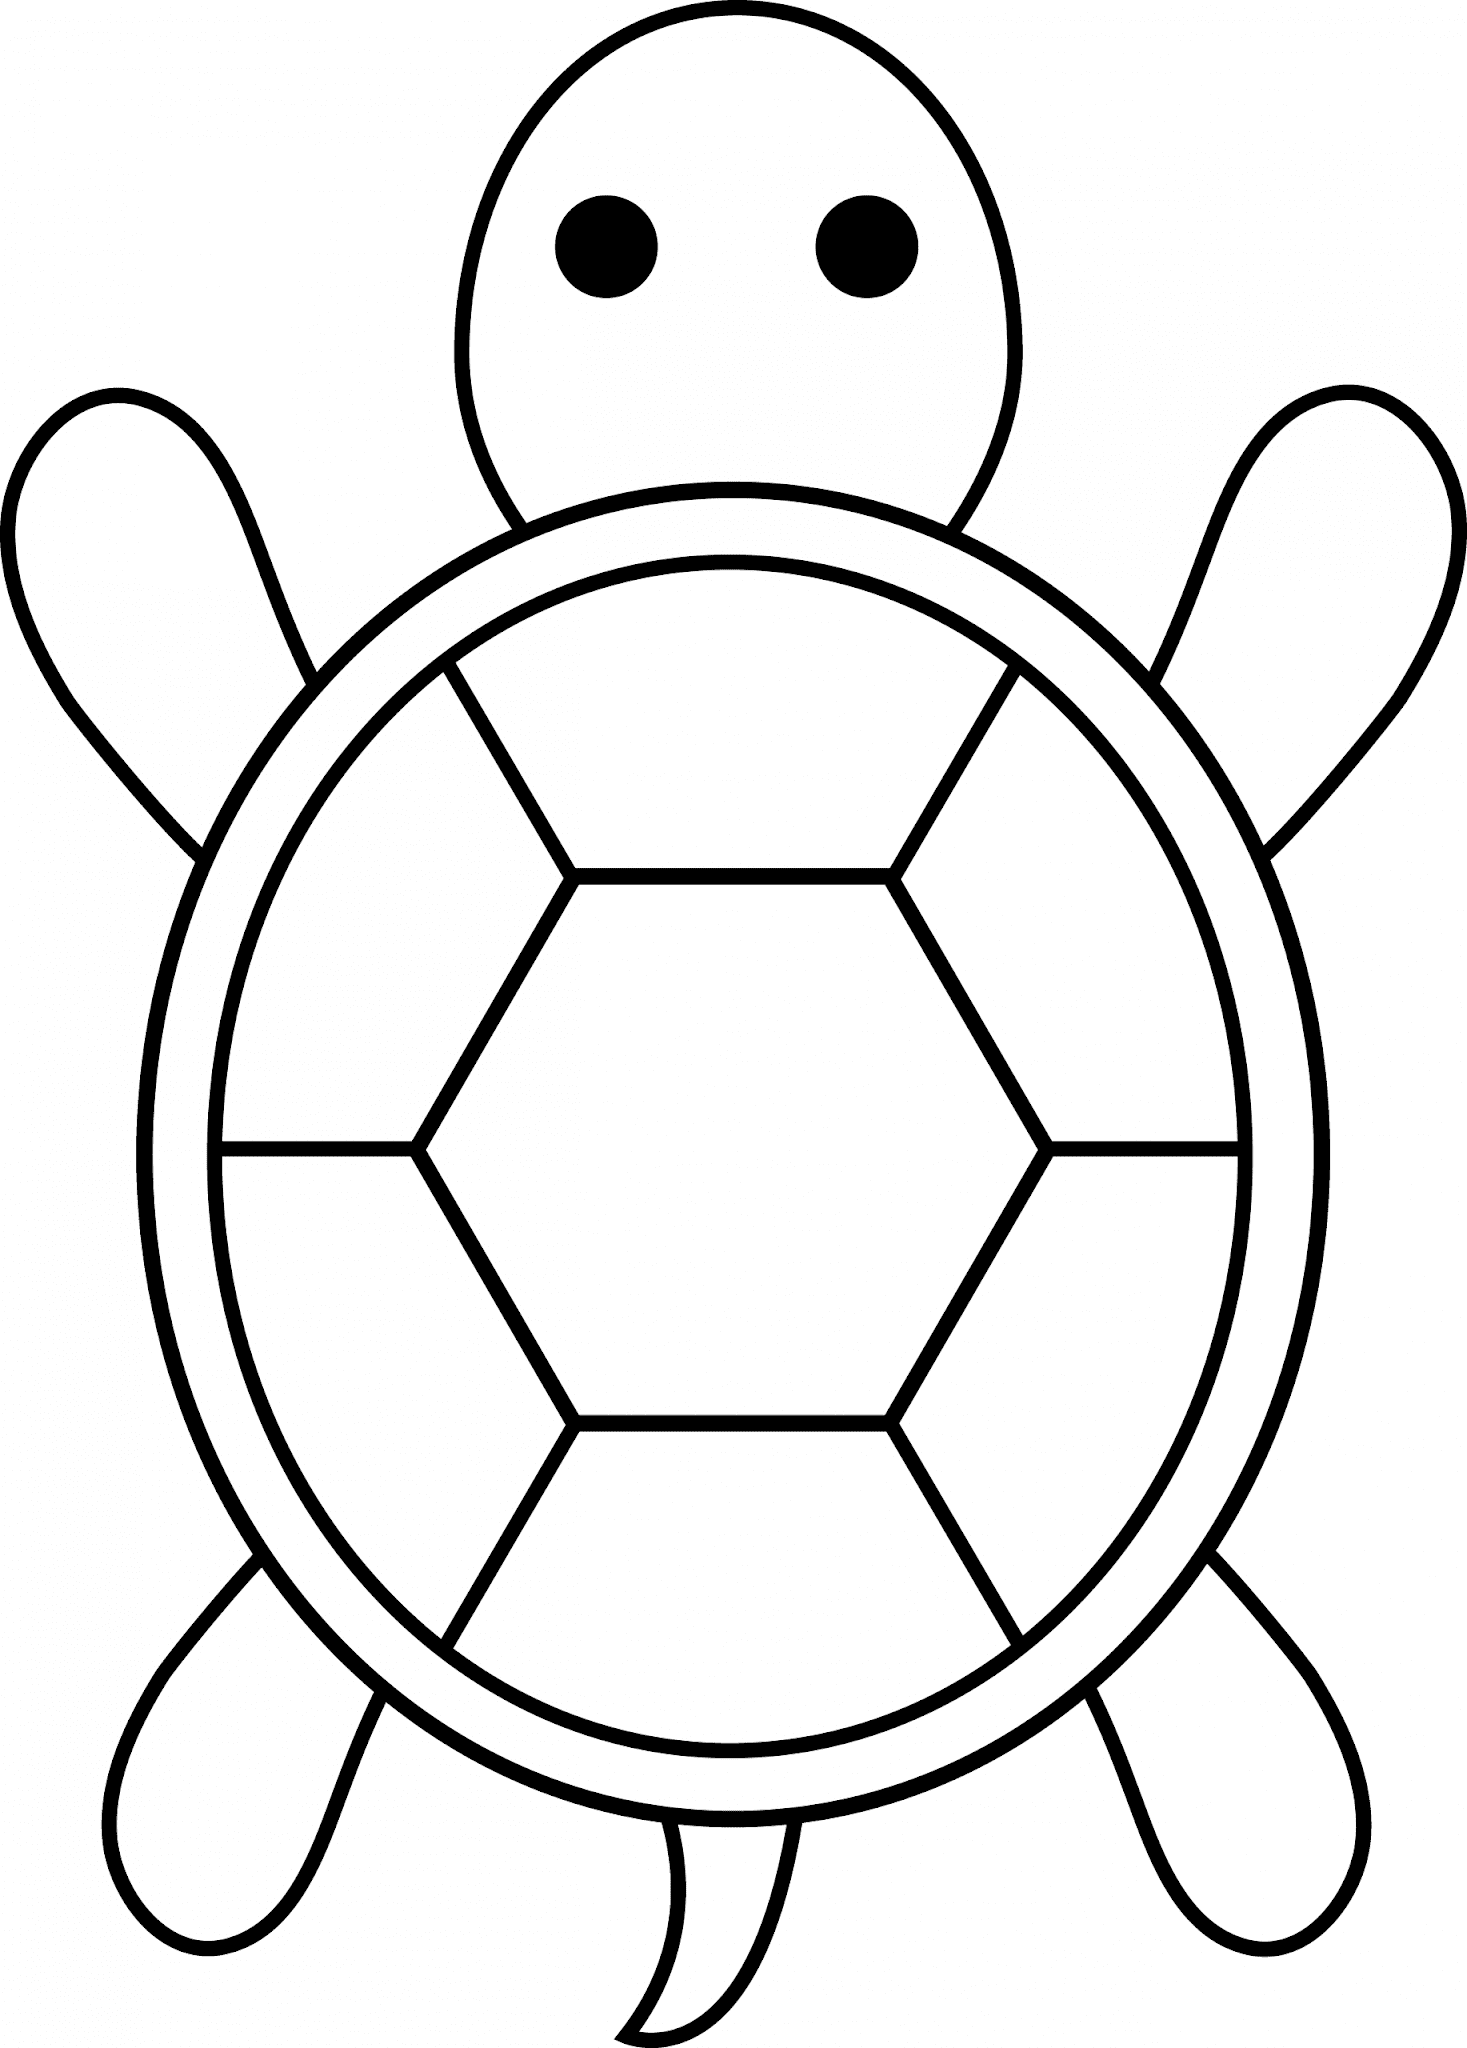 Free Simple Coloring Pages ~ Coloring Pages